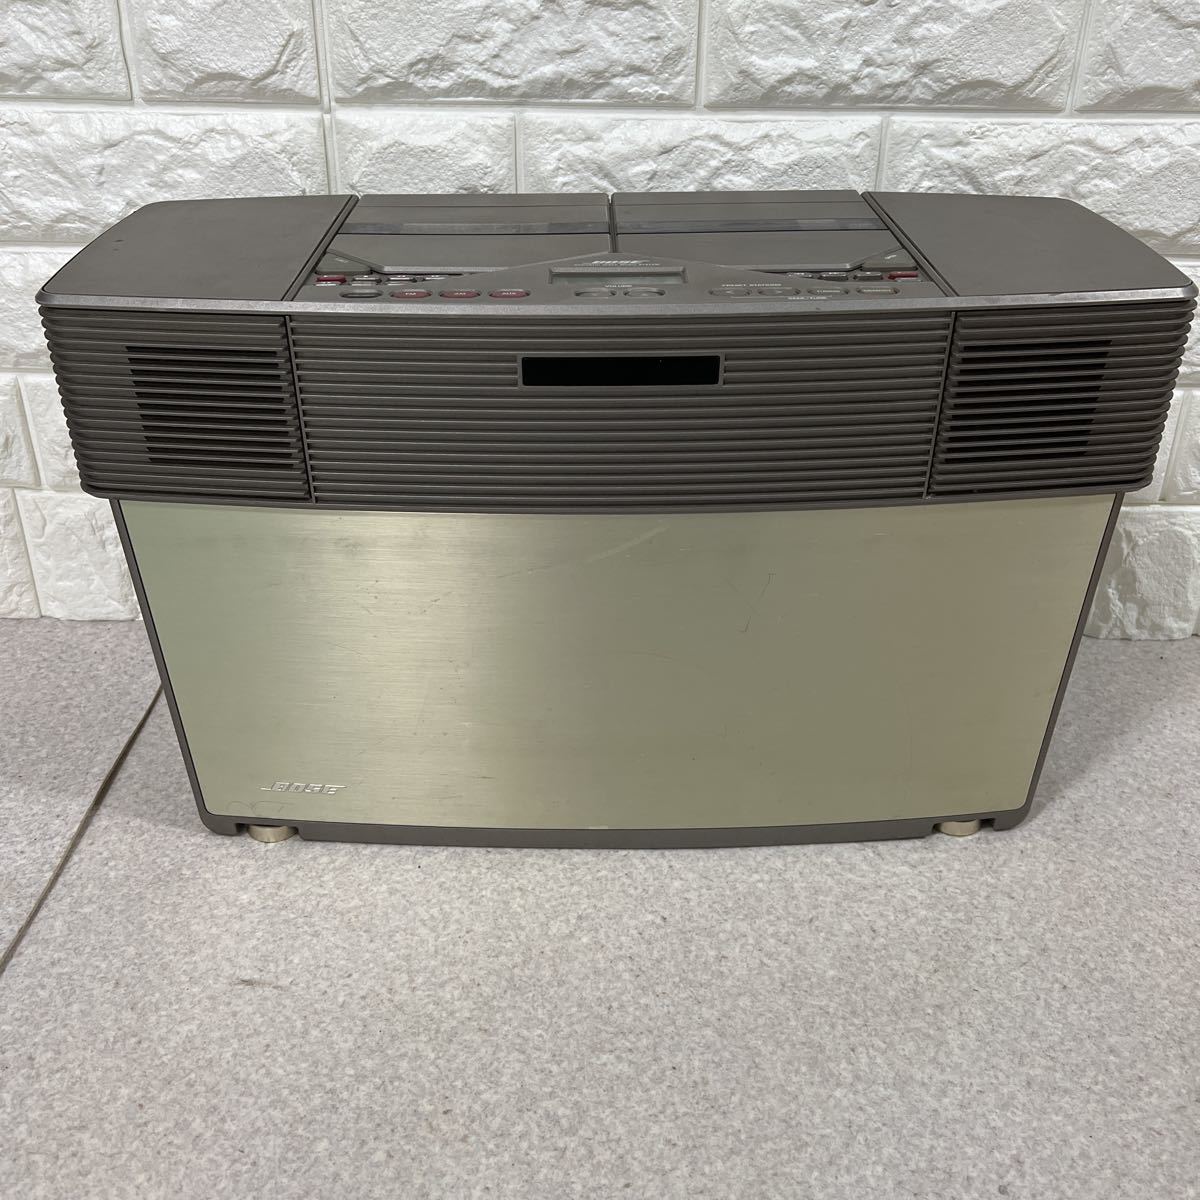 BOSE Acoustic Wave STEREO Music System Model AWM wattan24.com